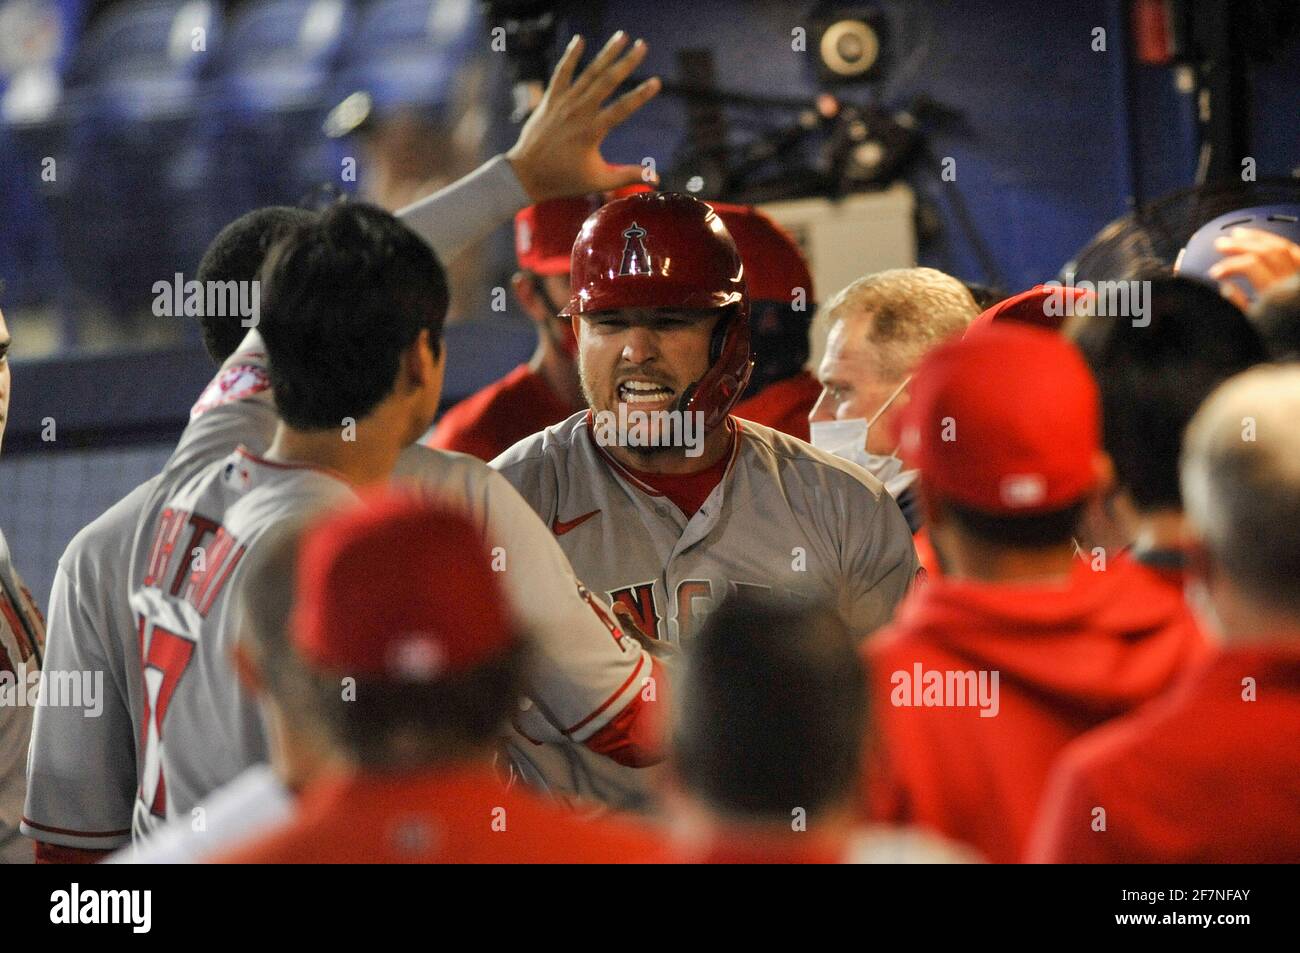 Dunedin, United States. 08th Apr, 2021. Los Angeles Angels teammates congratulate Mike Trout (C) in the dugout after his solo home run during the fifth inning against the Toronto Blue Jays at TD Ballpark in Dunedin, Florida on Thursday, April 8, 2021. Photo by Steven J. Nesius/UPI Credit: UPI/Alamy Live News Stock Photo